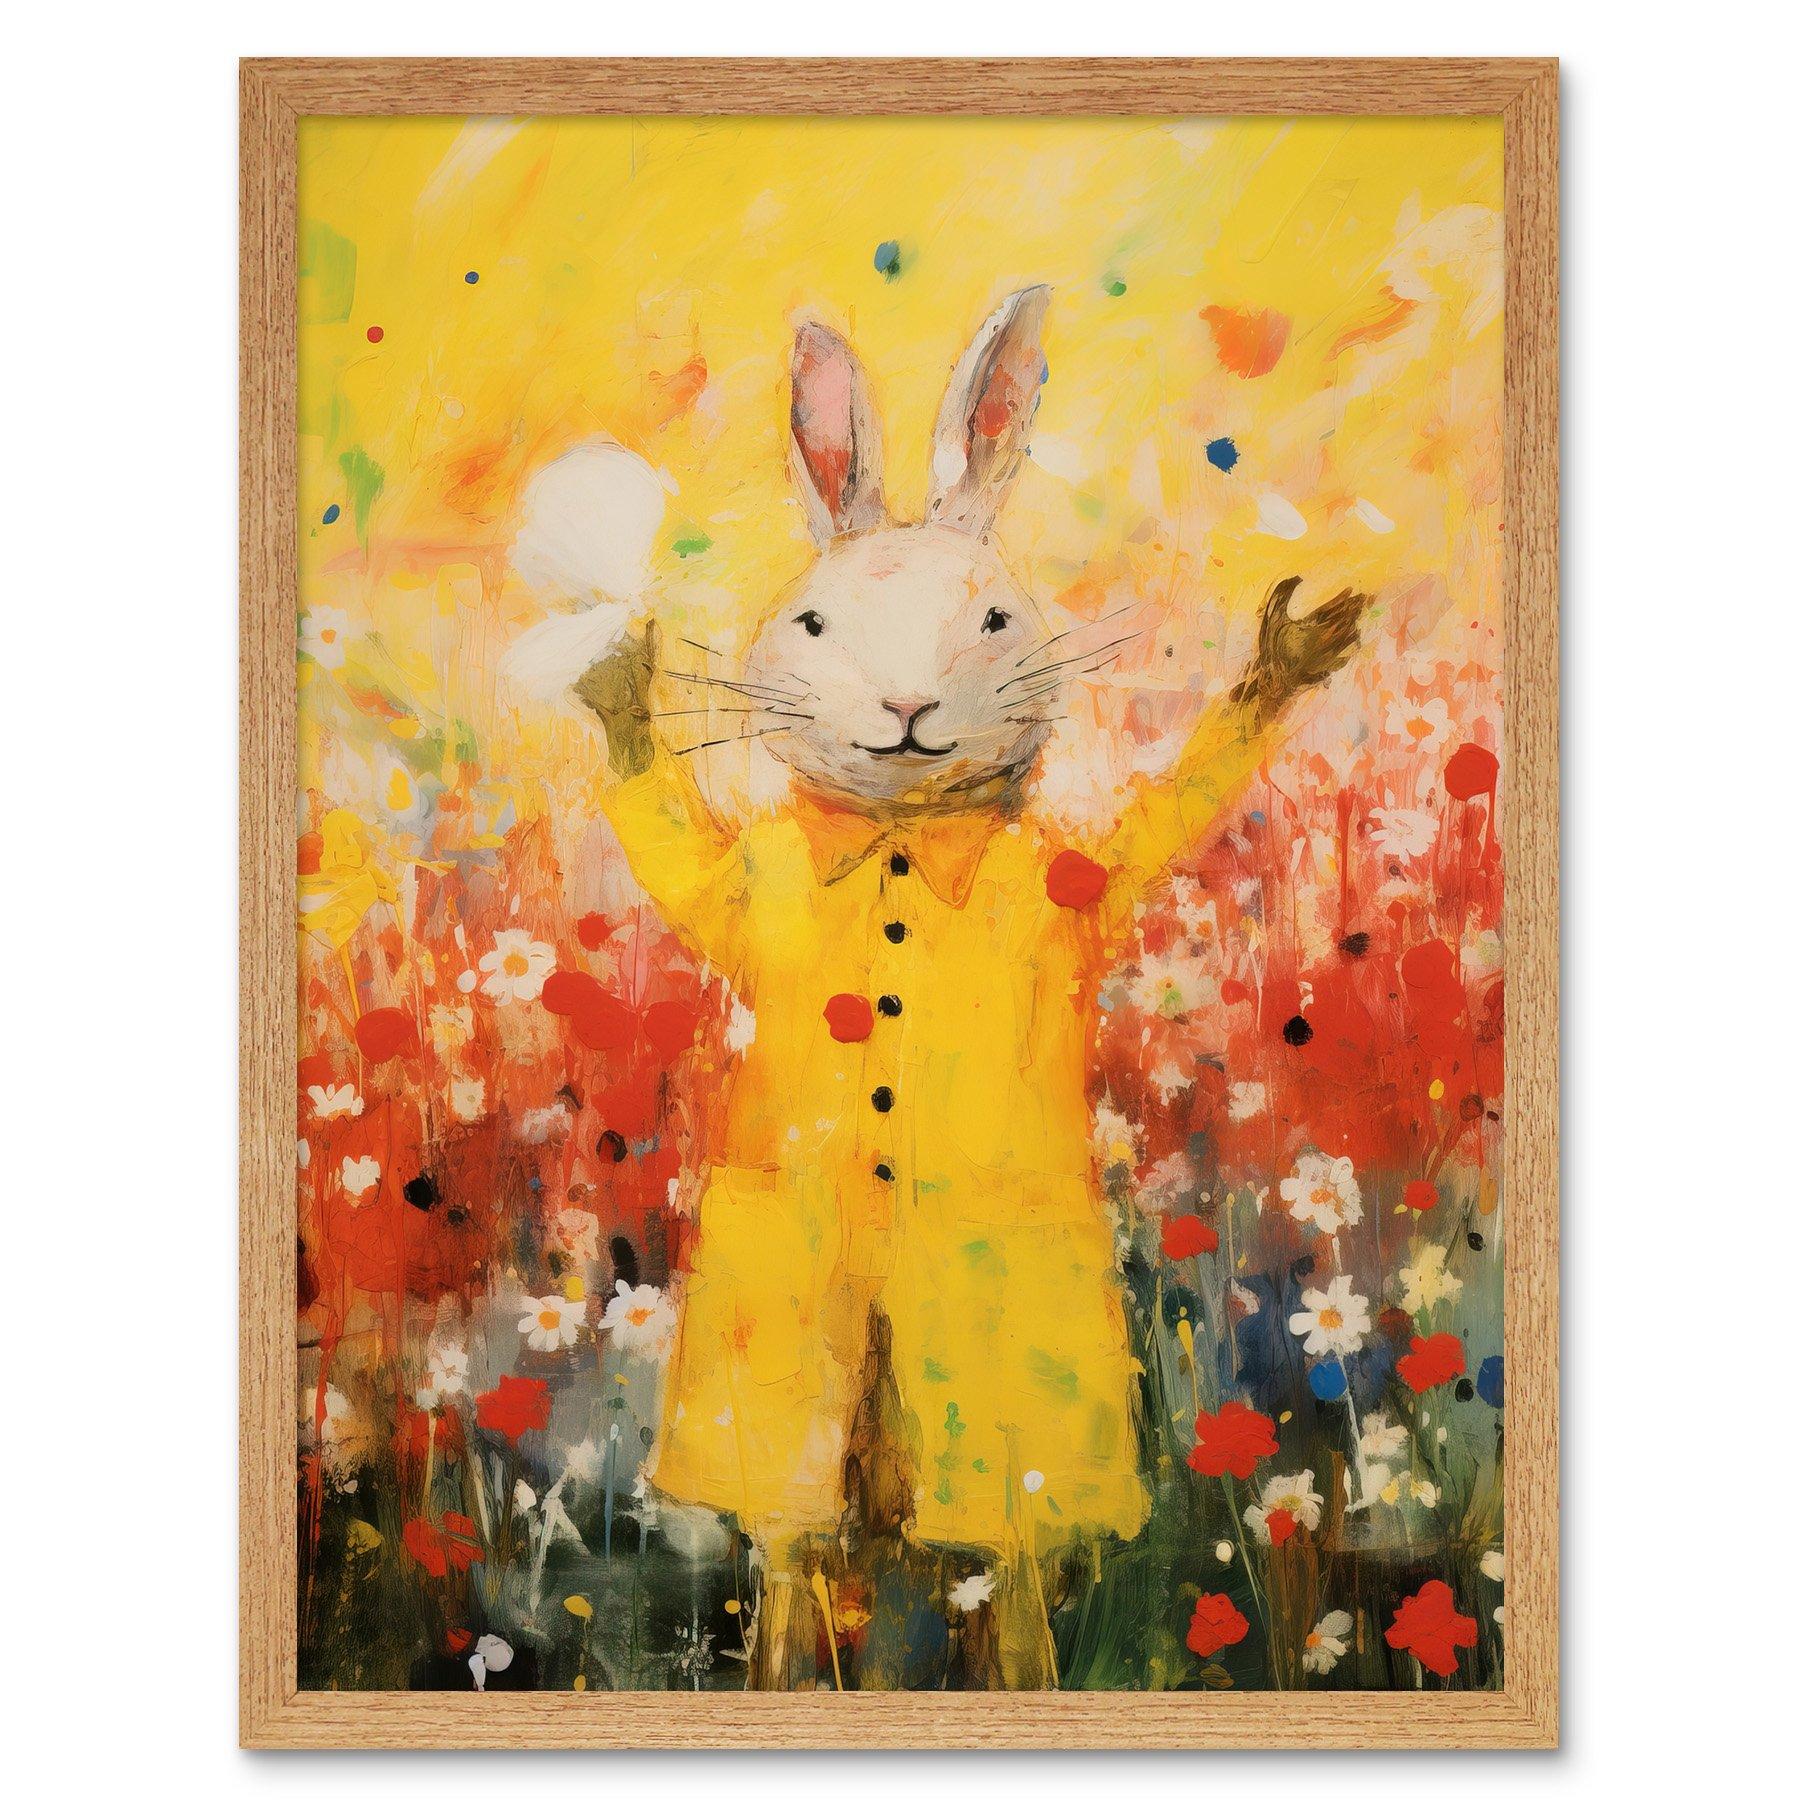 Rabbit in a Yellow Rain Mac Oil Painting Bright Floral Meadow Kids Bedroom Nursery Art Print Framed Poster Wall Decor 12x16 inch